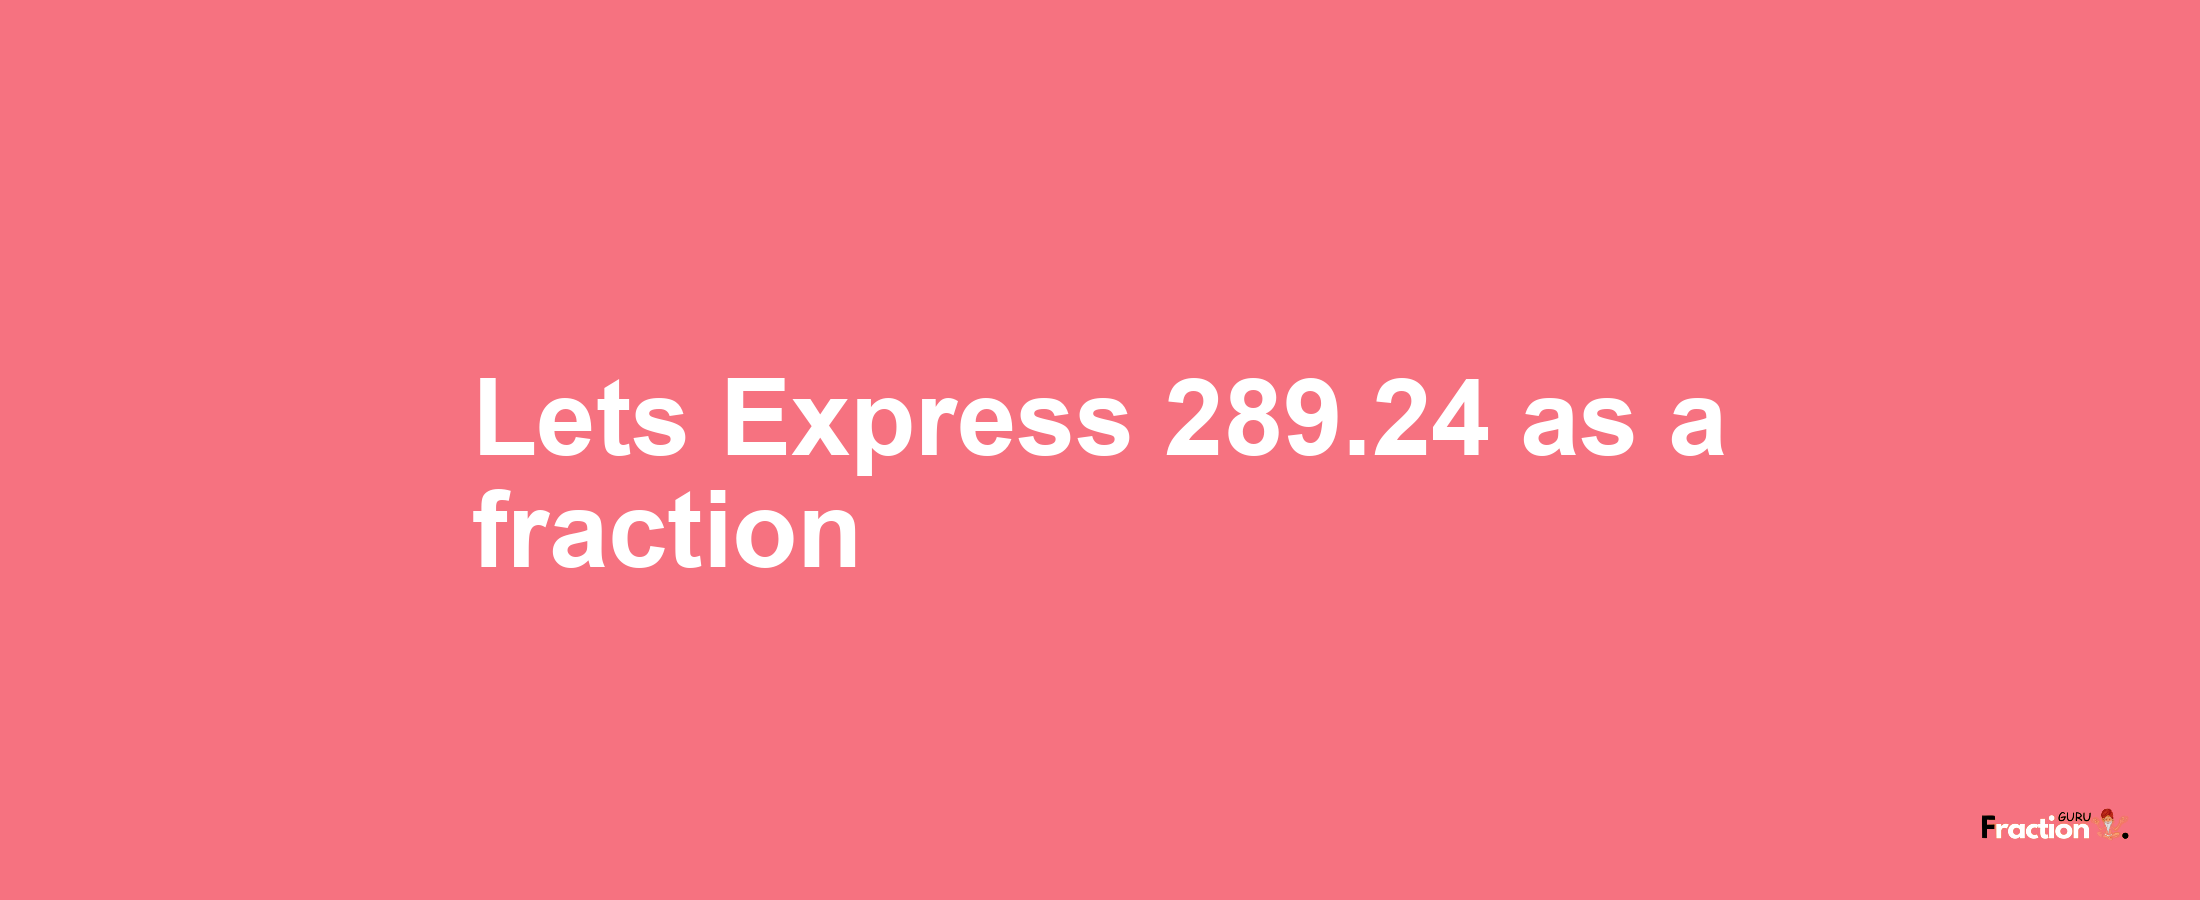 Lets Express 289.24 as afraction